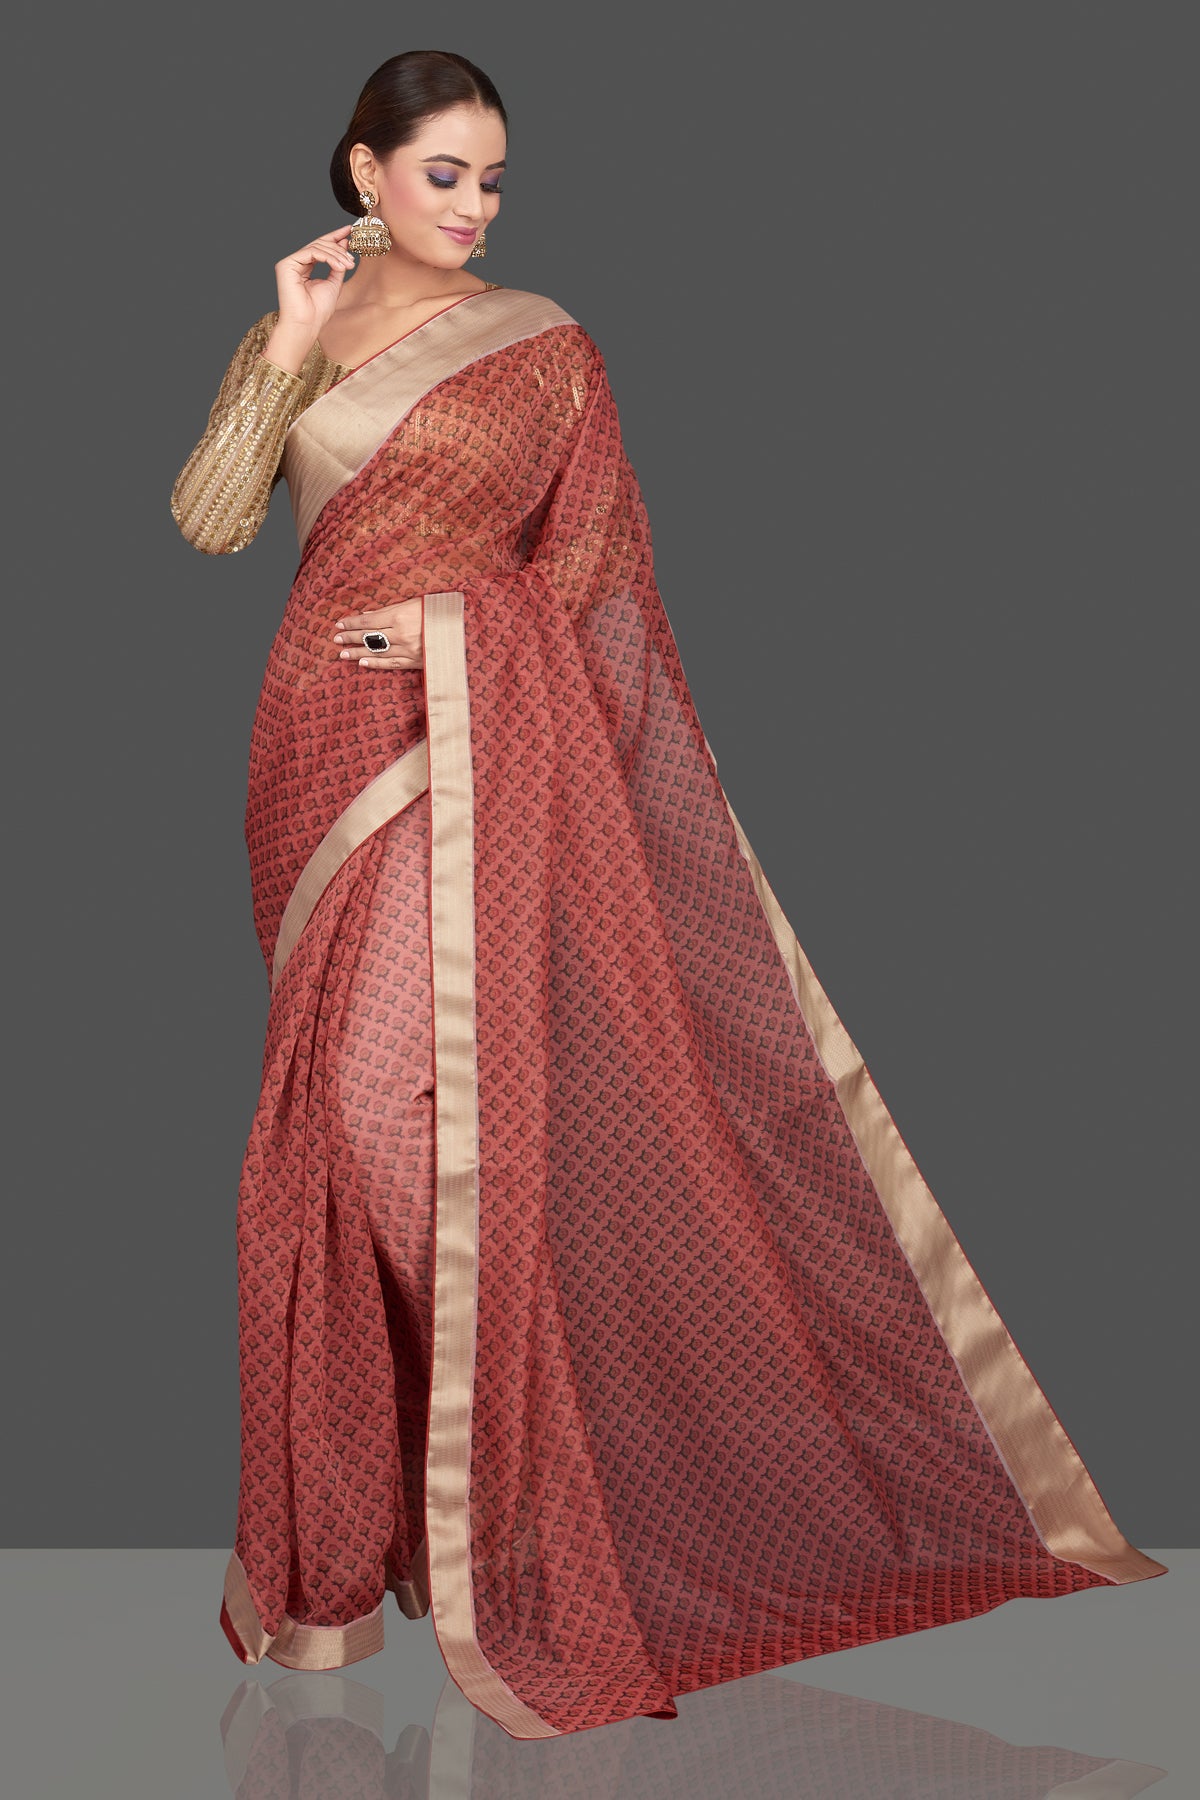 Buy red printed organza sari online in USA with golden sari blouse. Look glamorous at parties and weddings in stunning designer sarees, embroidered sareees, fancy sarees, Bollywood sarees from Pure Elegance Indian saree store in USA.-full view